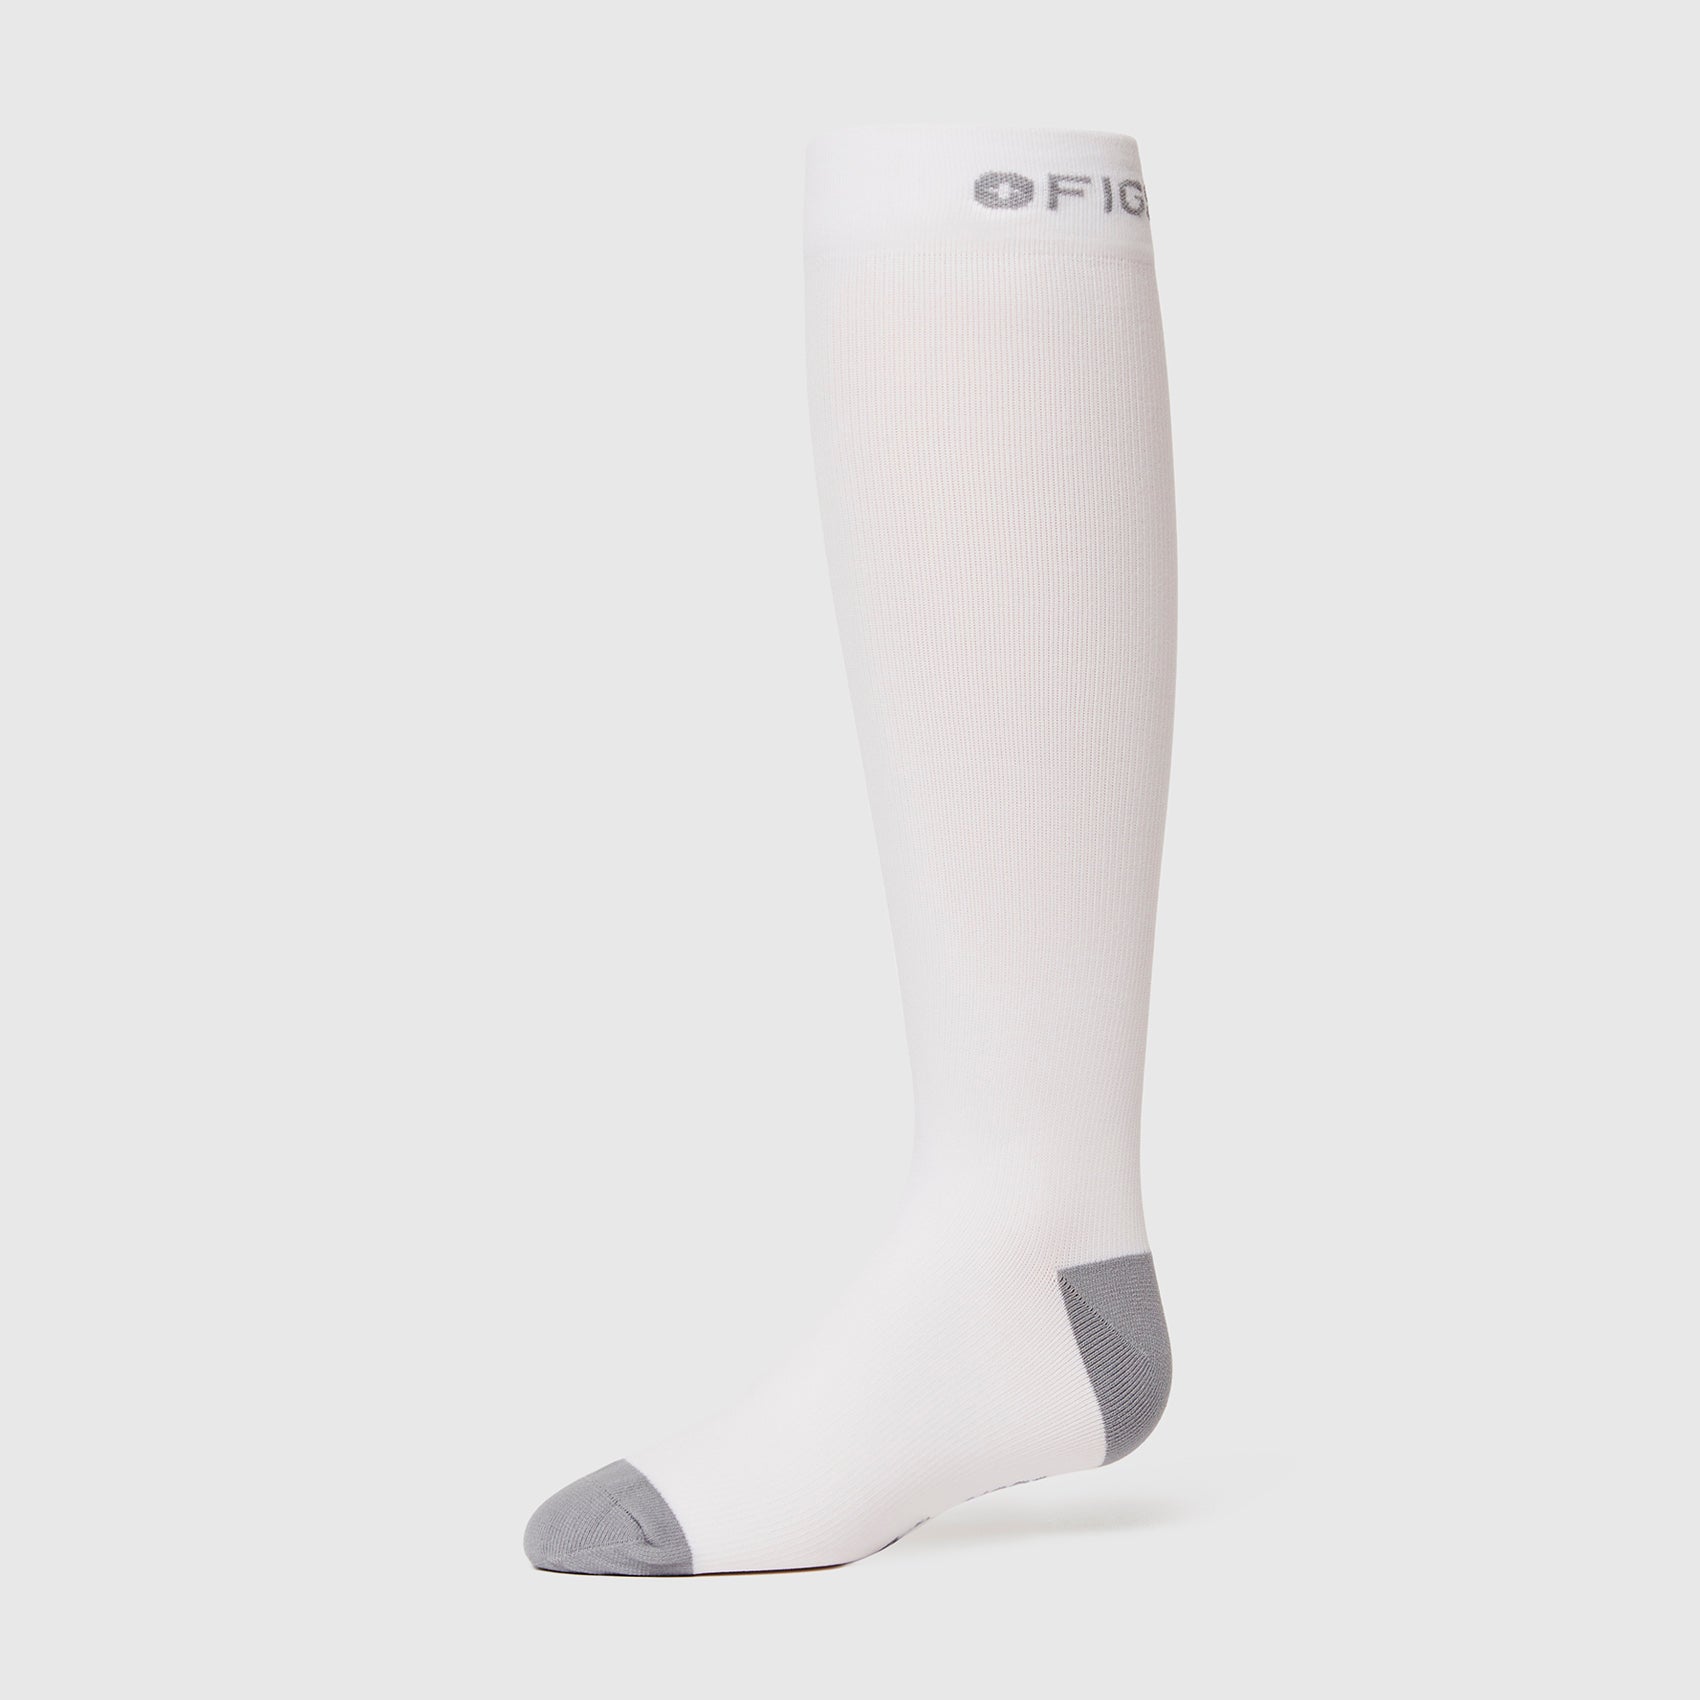 https://cdn.shopify.com/s/files/1/0139/8942/products/Q1_2022_12_WHITE_COMPRESSIONSOCKS_W_GHOST_16723.jpg?v=1674076293